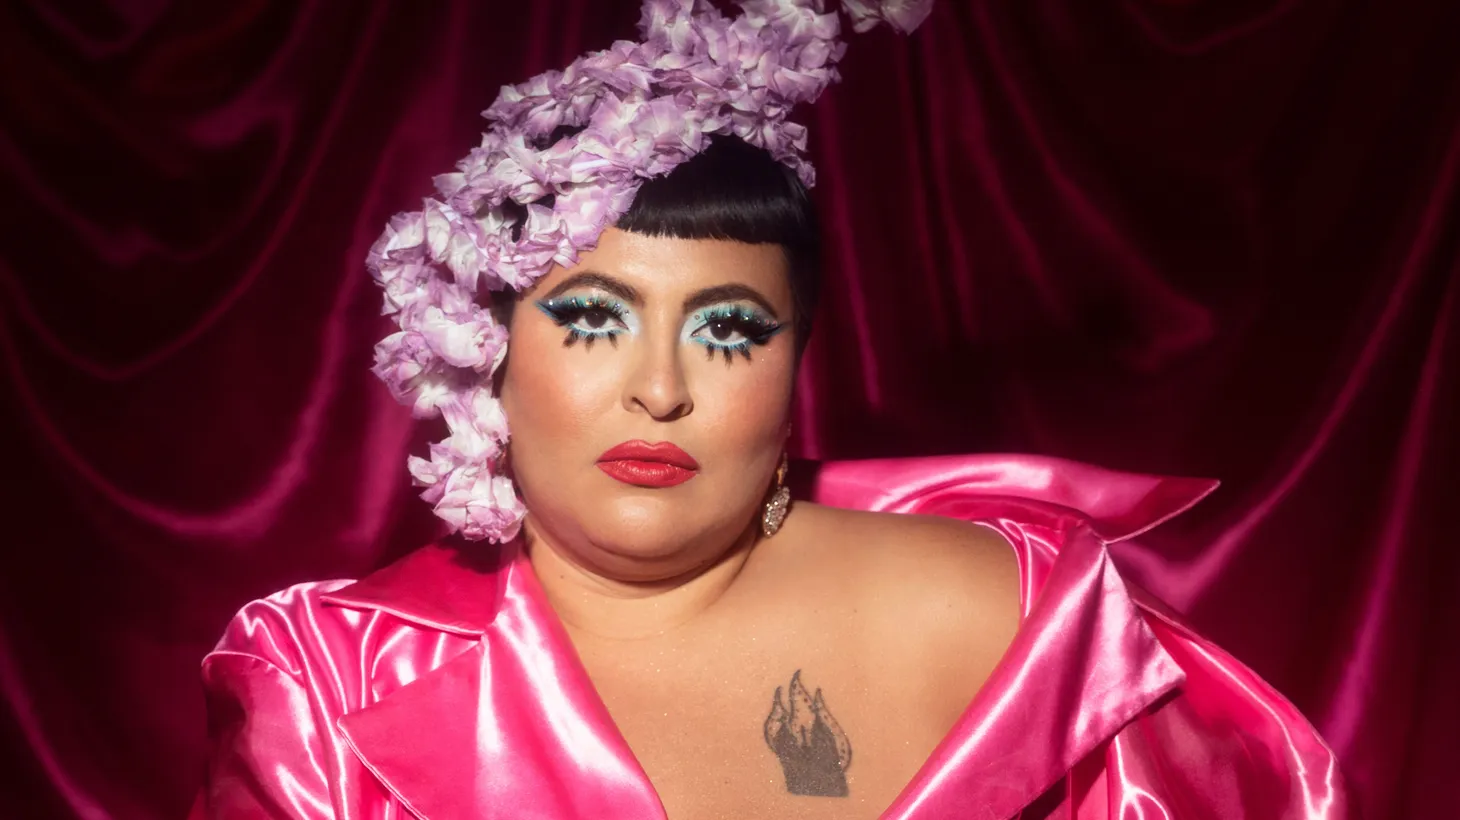 A first generation child of Mexican immigrants based in the Bay Area, San Cha took a break and stayed at her aunt’s farm back home to reimagine herself, and sees herself as a subversive queer ranchera singer.